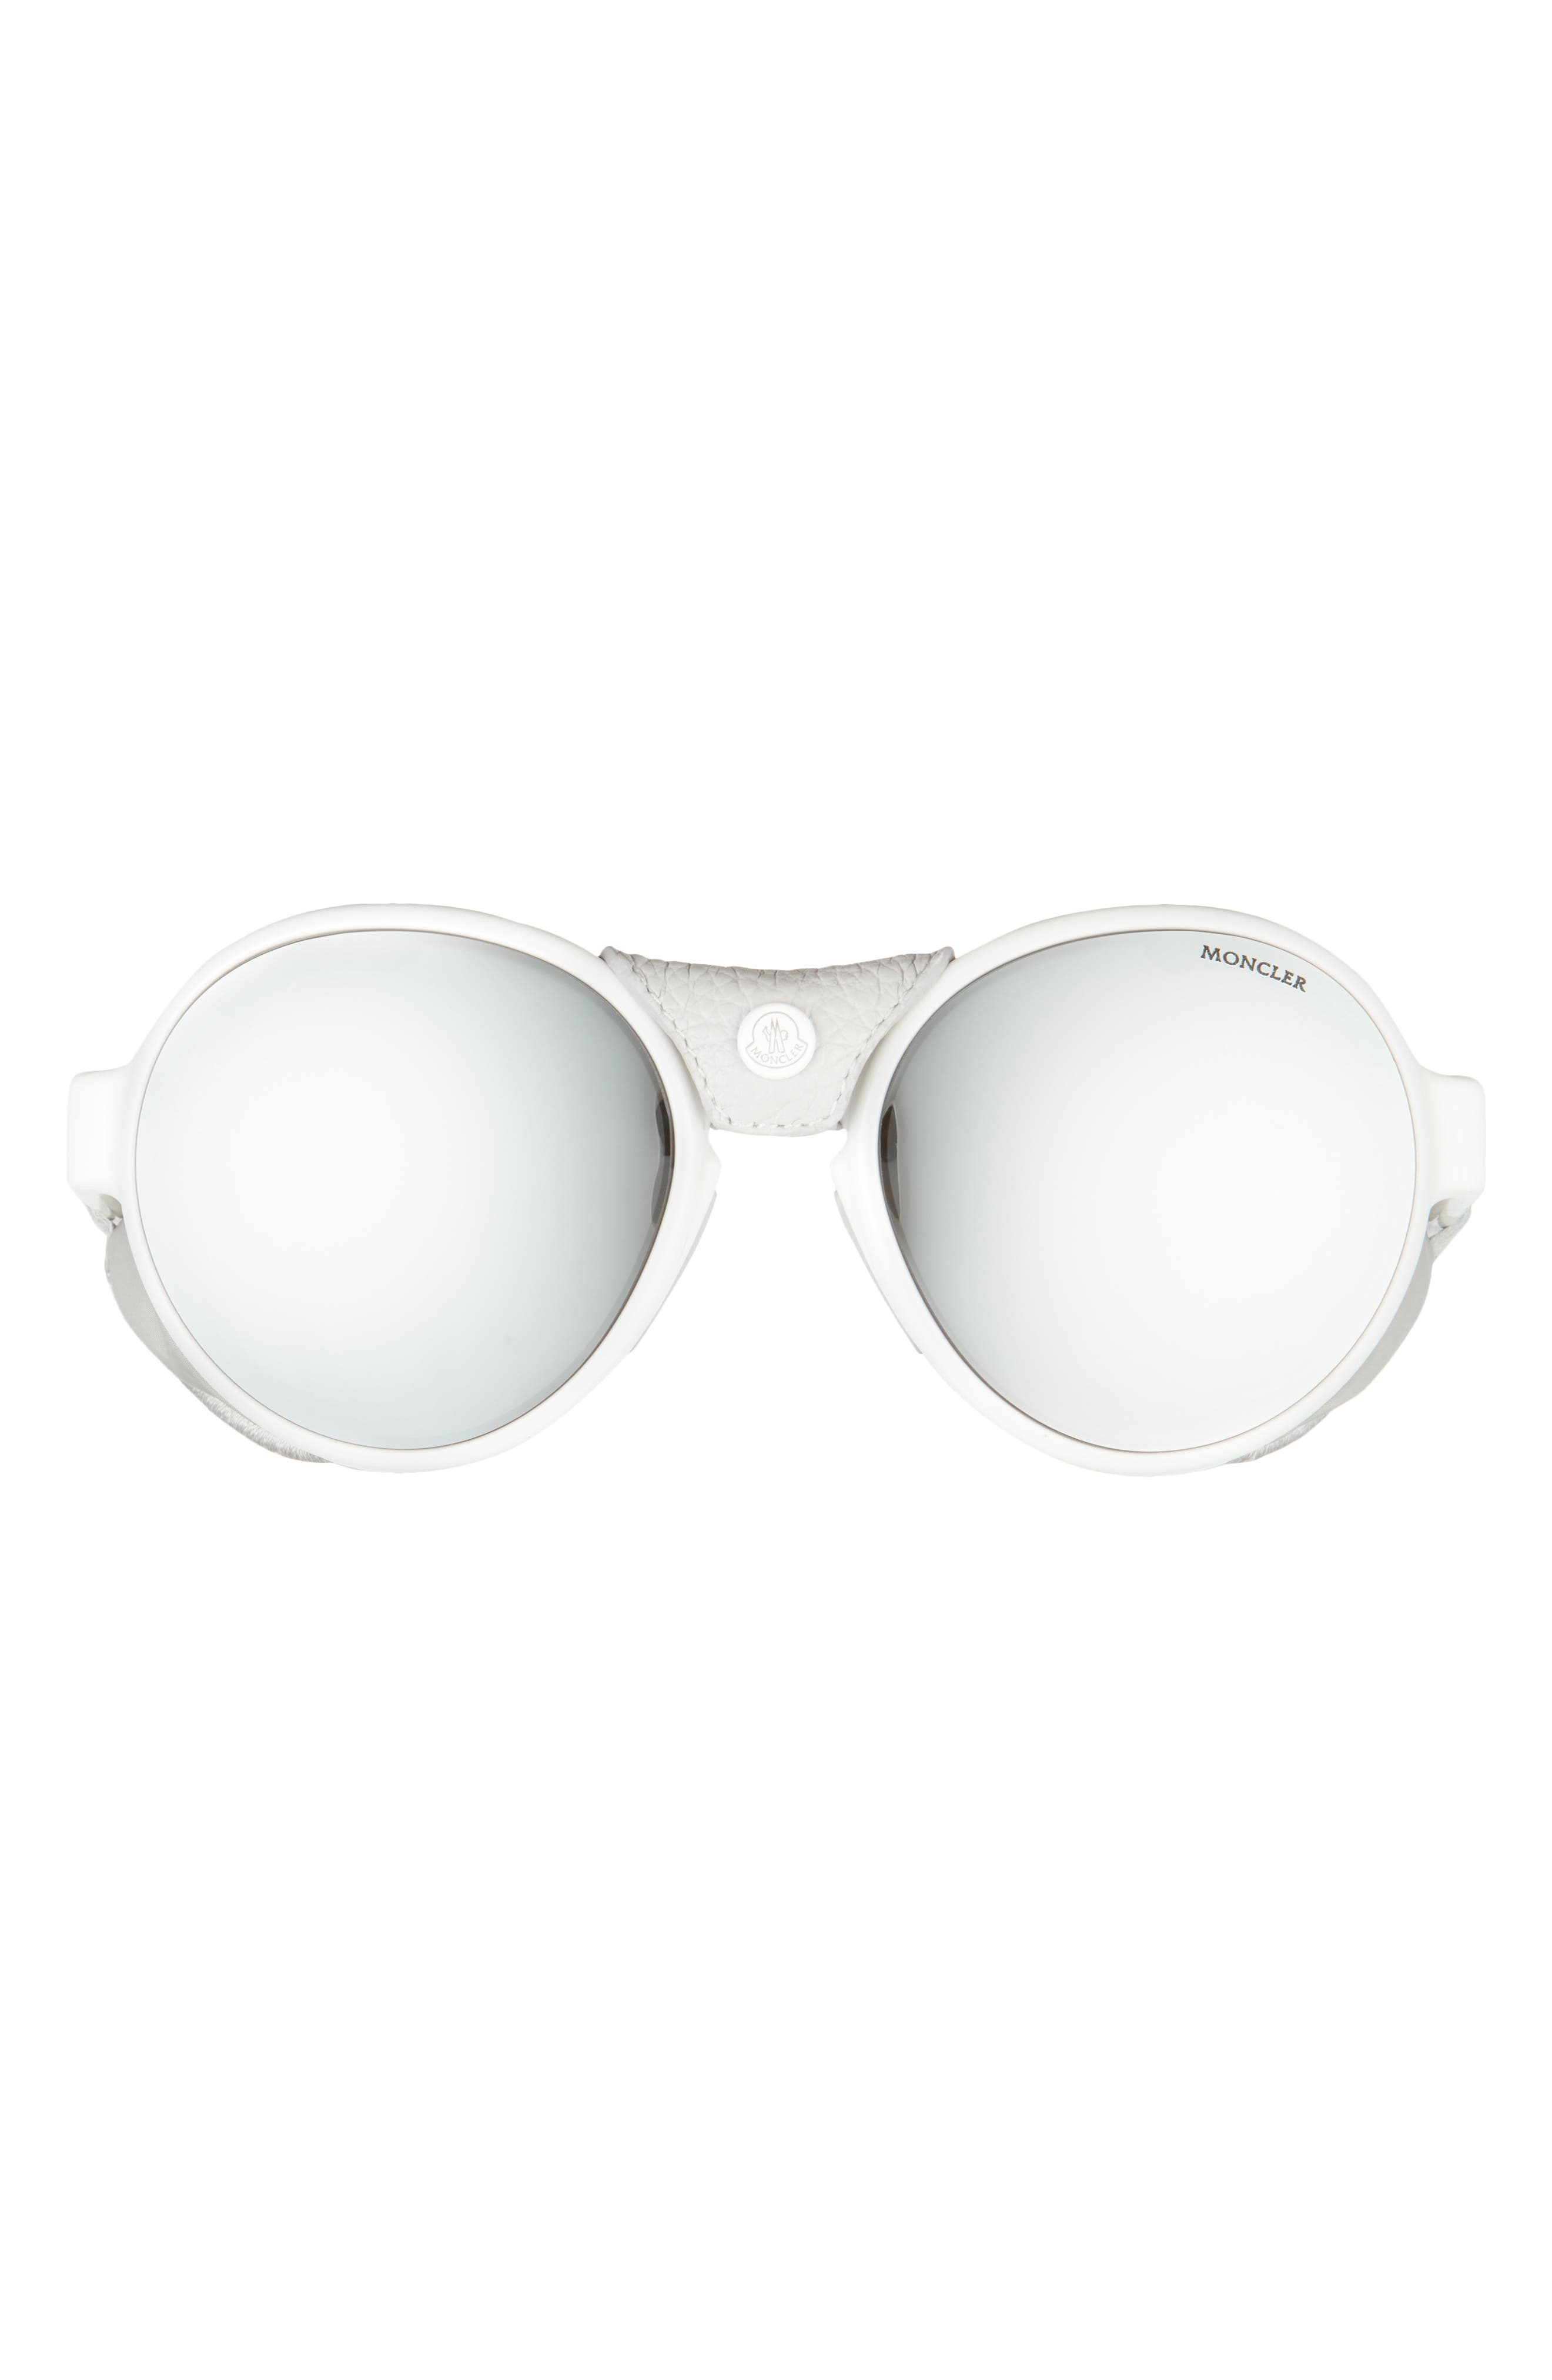 Moncler 56mm Polarized Round Sunglasses in White/Grey at Nordstrom